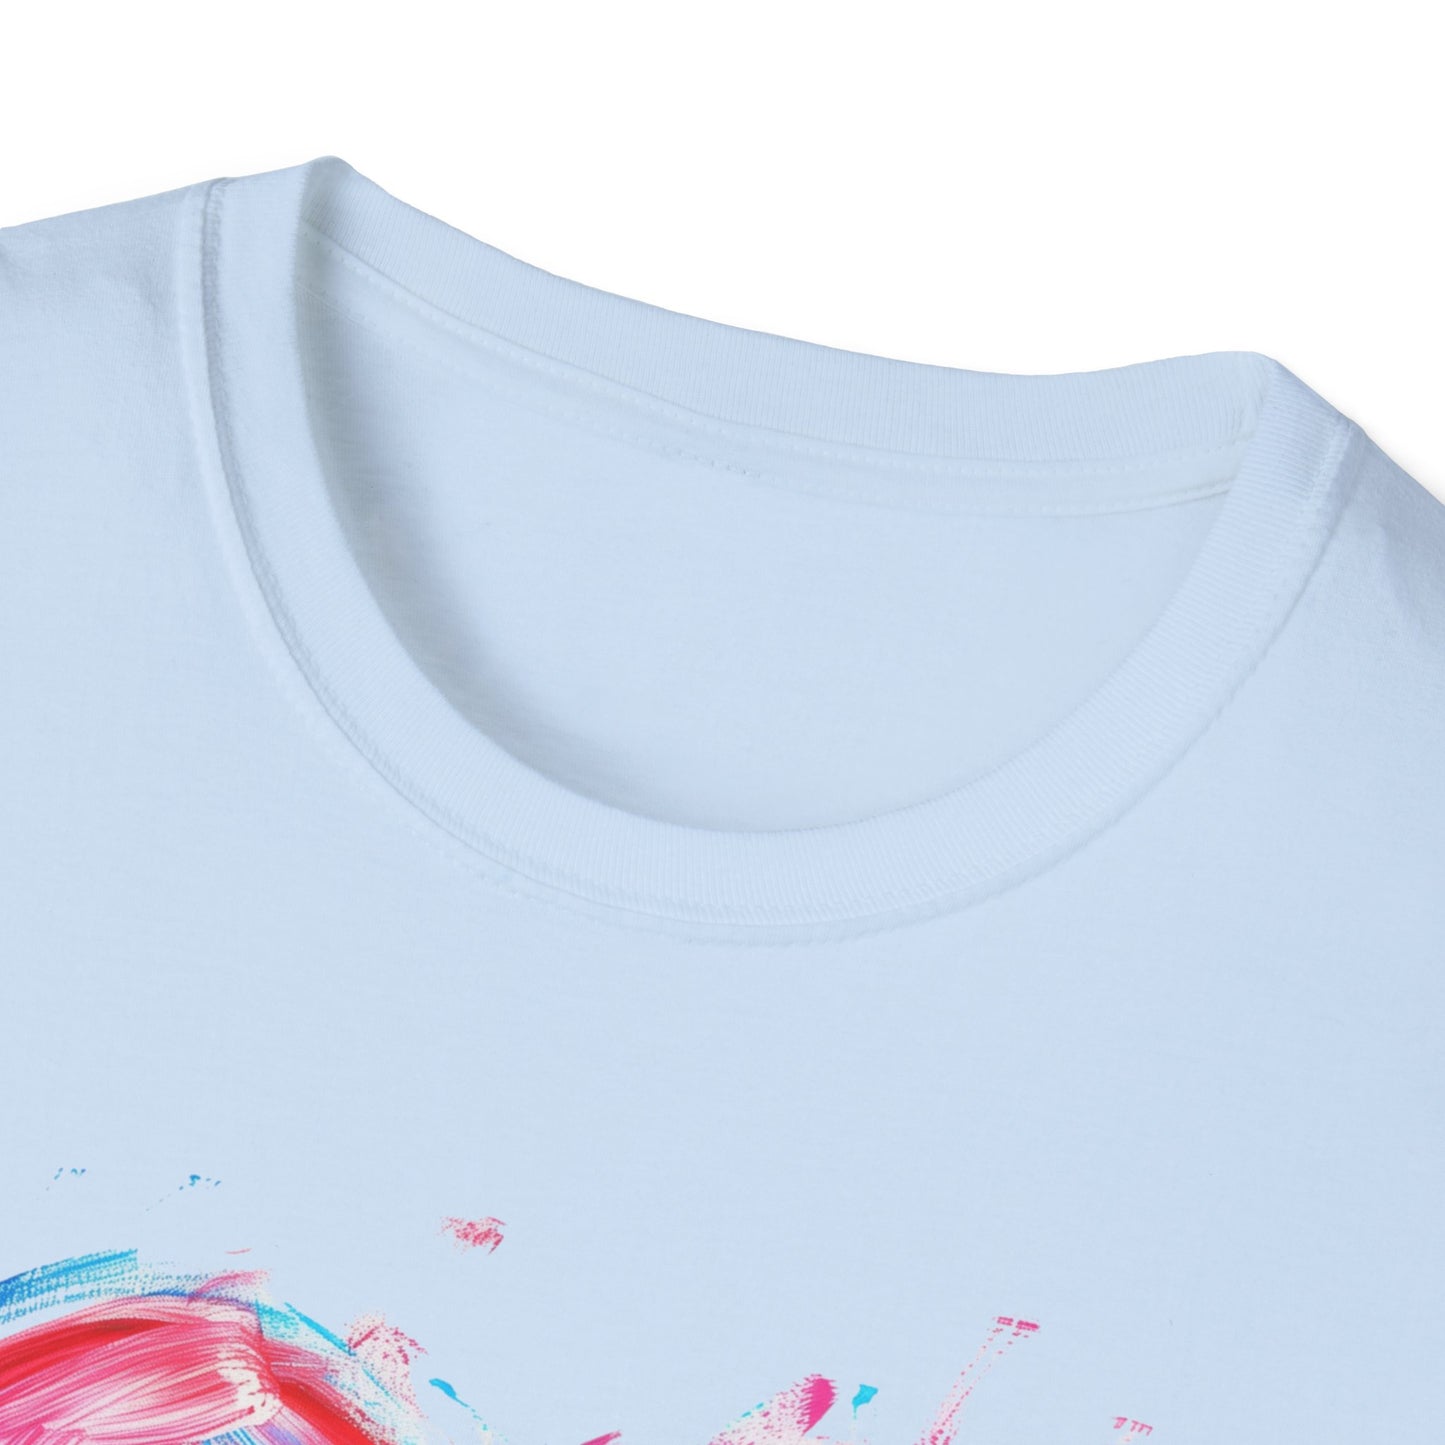 Pride Pink and Blue T-Shirt | Show Your Pride!